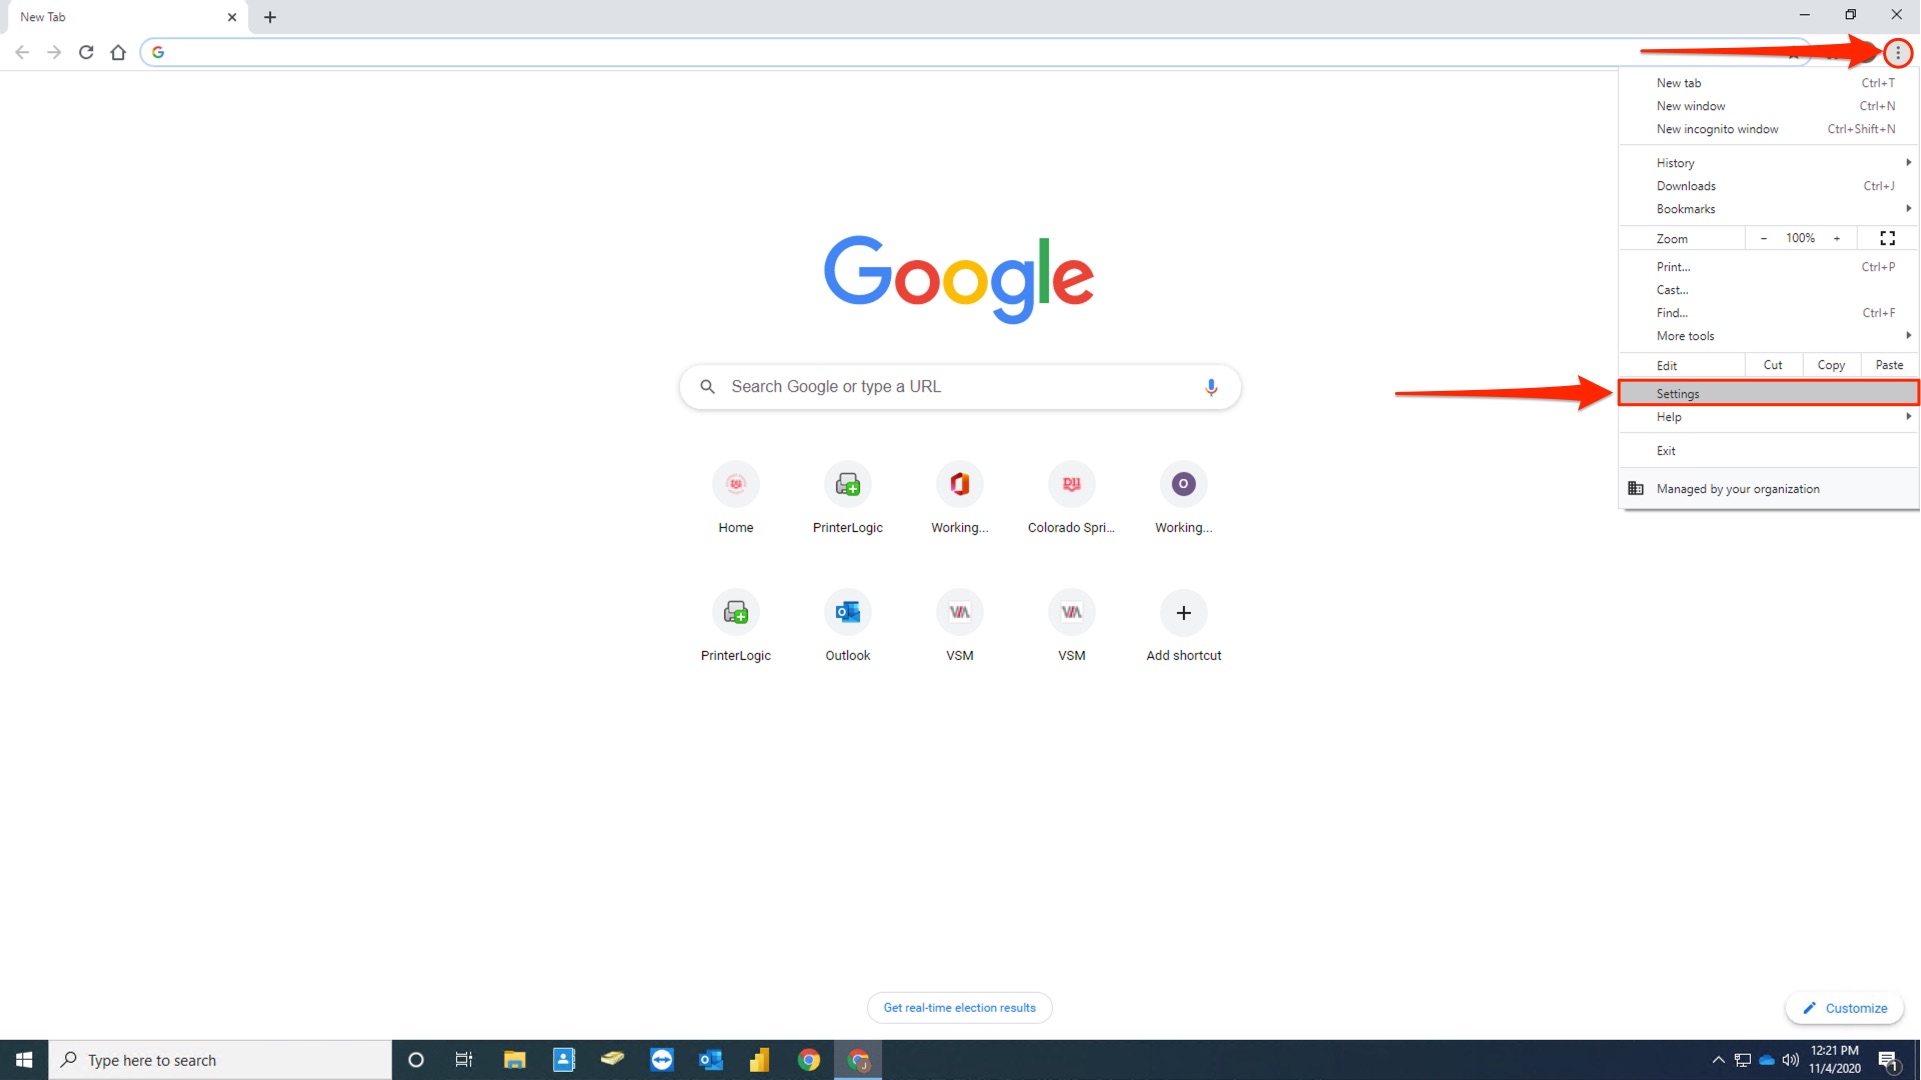 Click on the three vertical dots at the top right corner of the Chrome window to open the menu.
Select "Settings" from the drop-down menu.